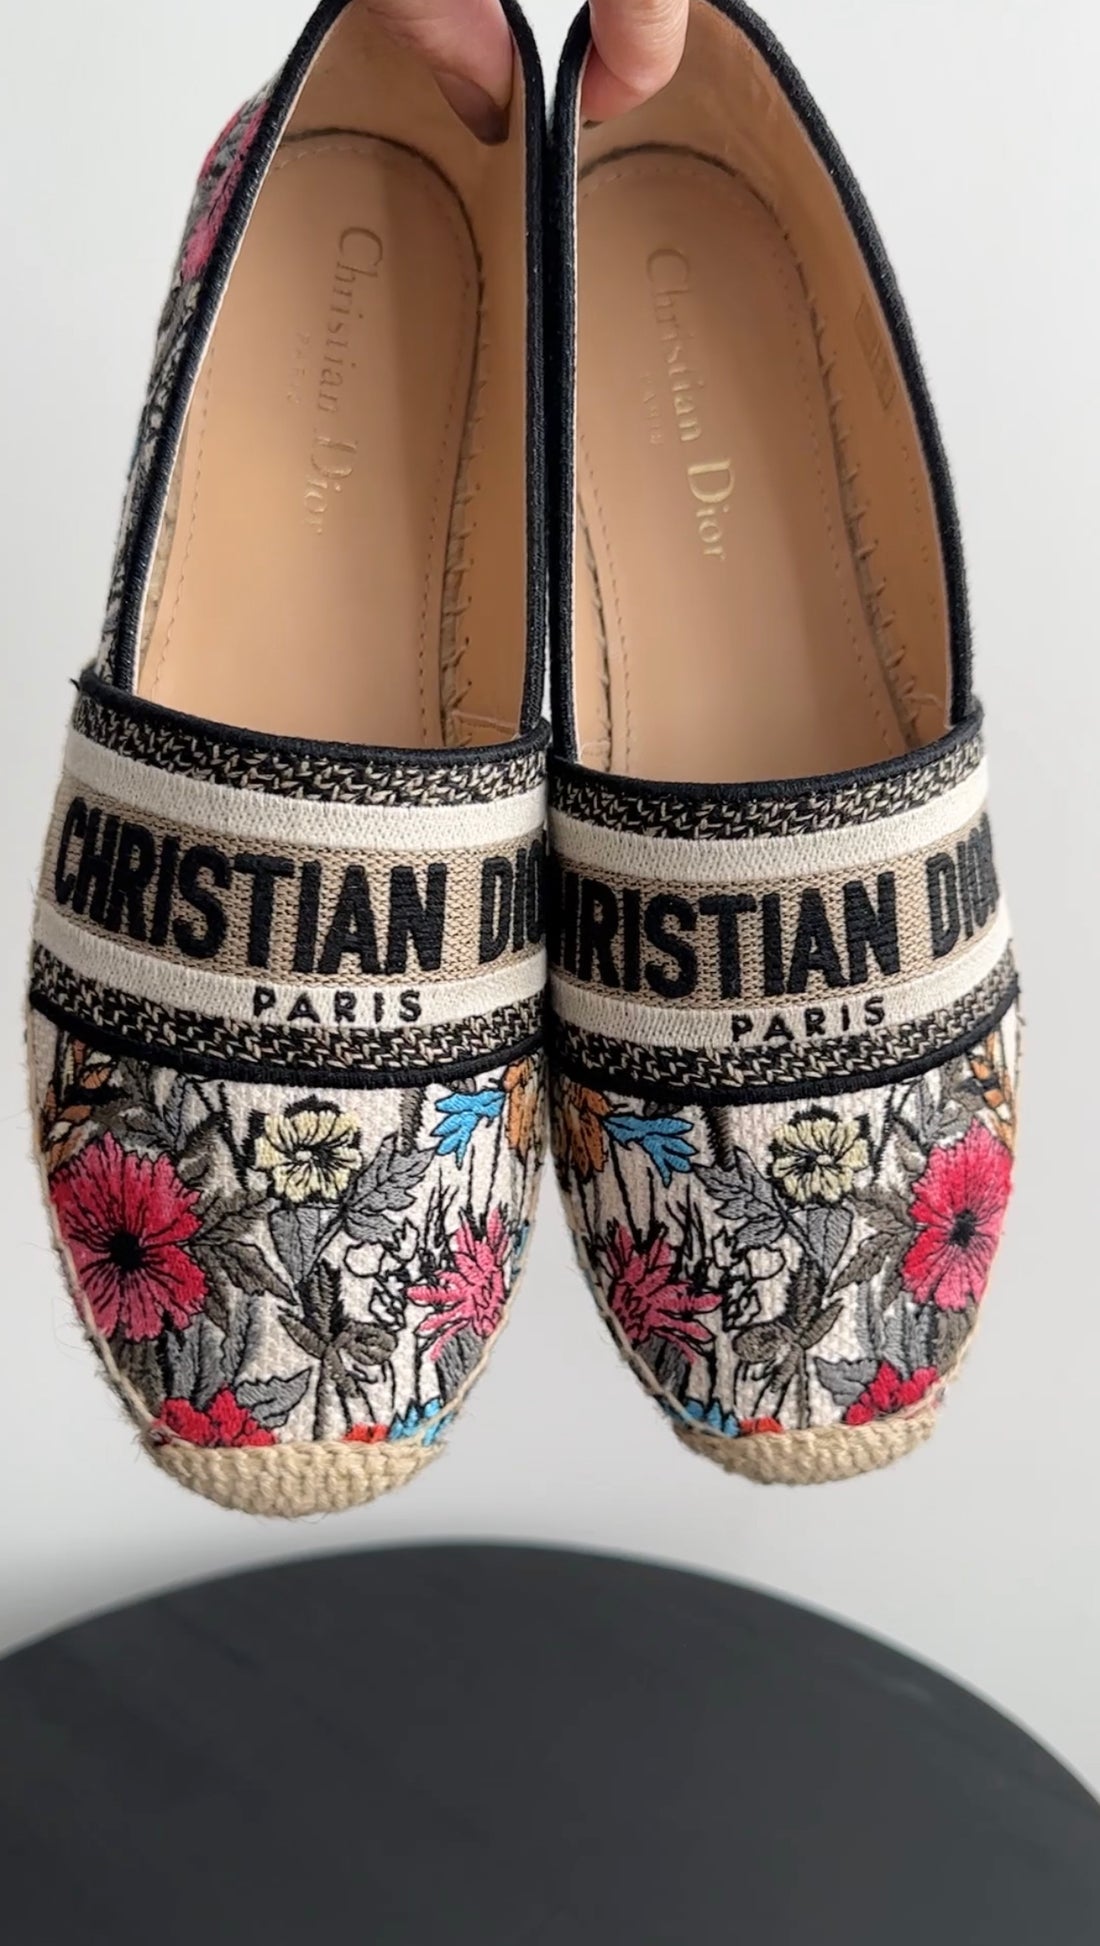 Christian Dior Floral Embroidered Espadrille - 38 / 7.5